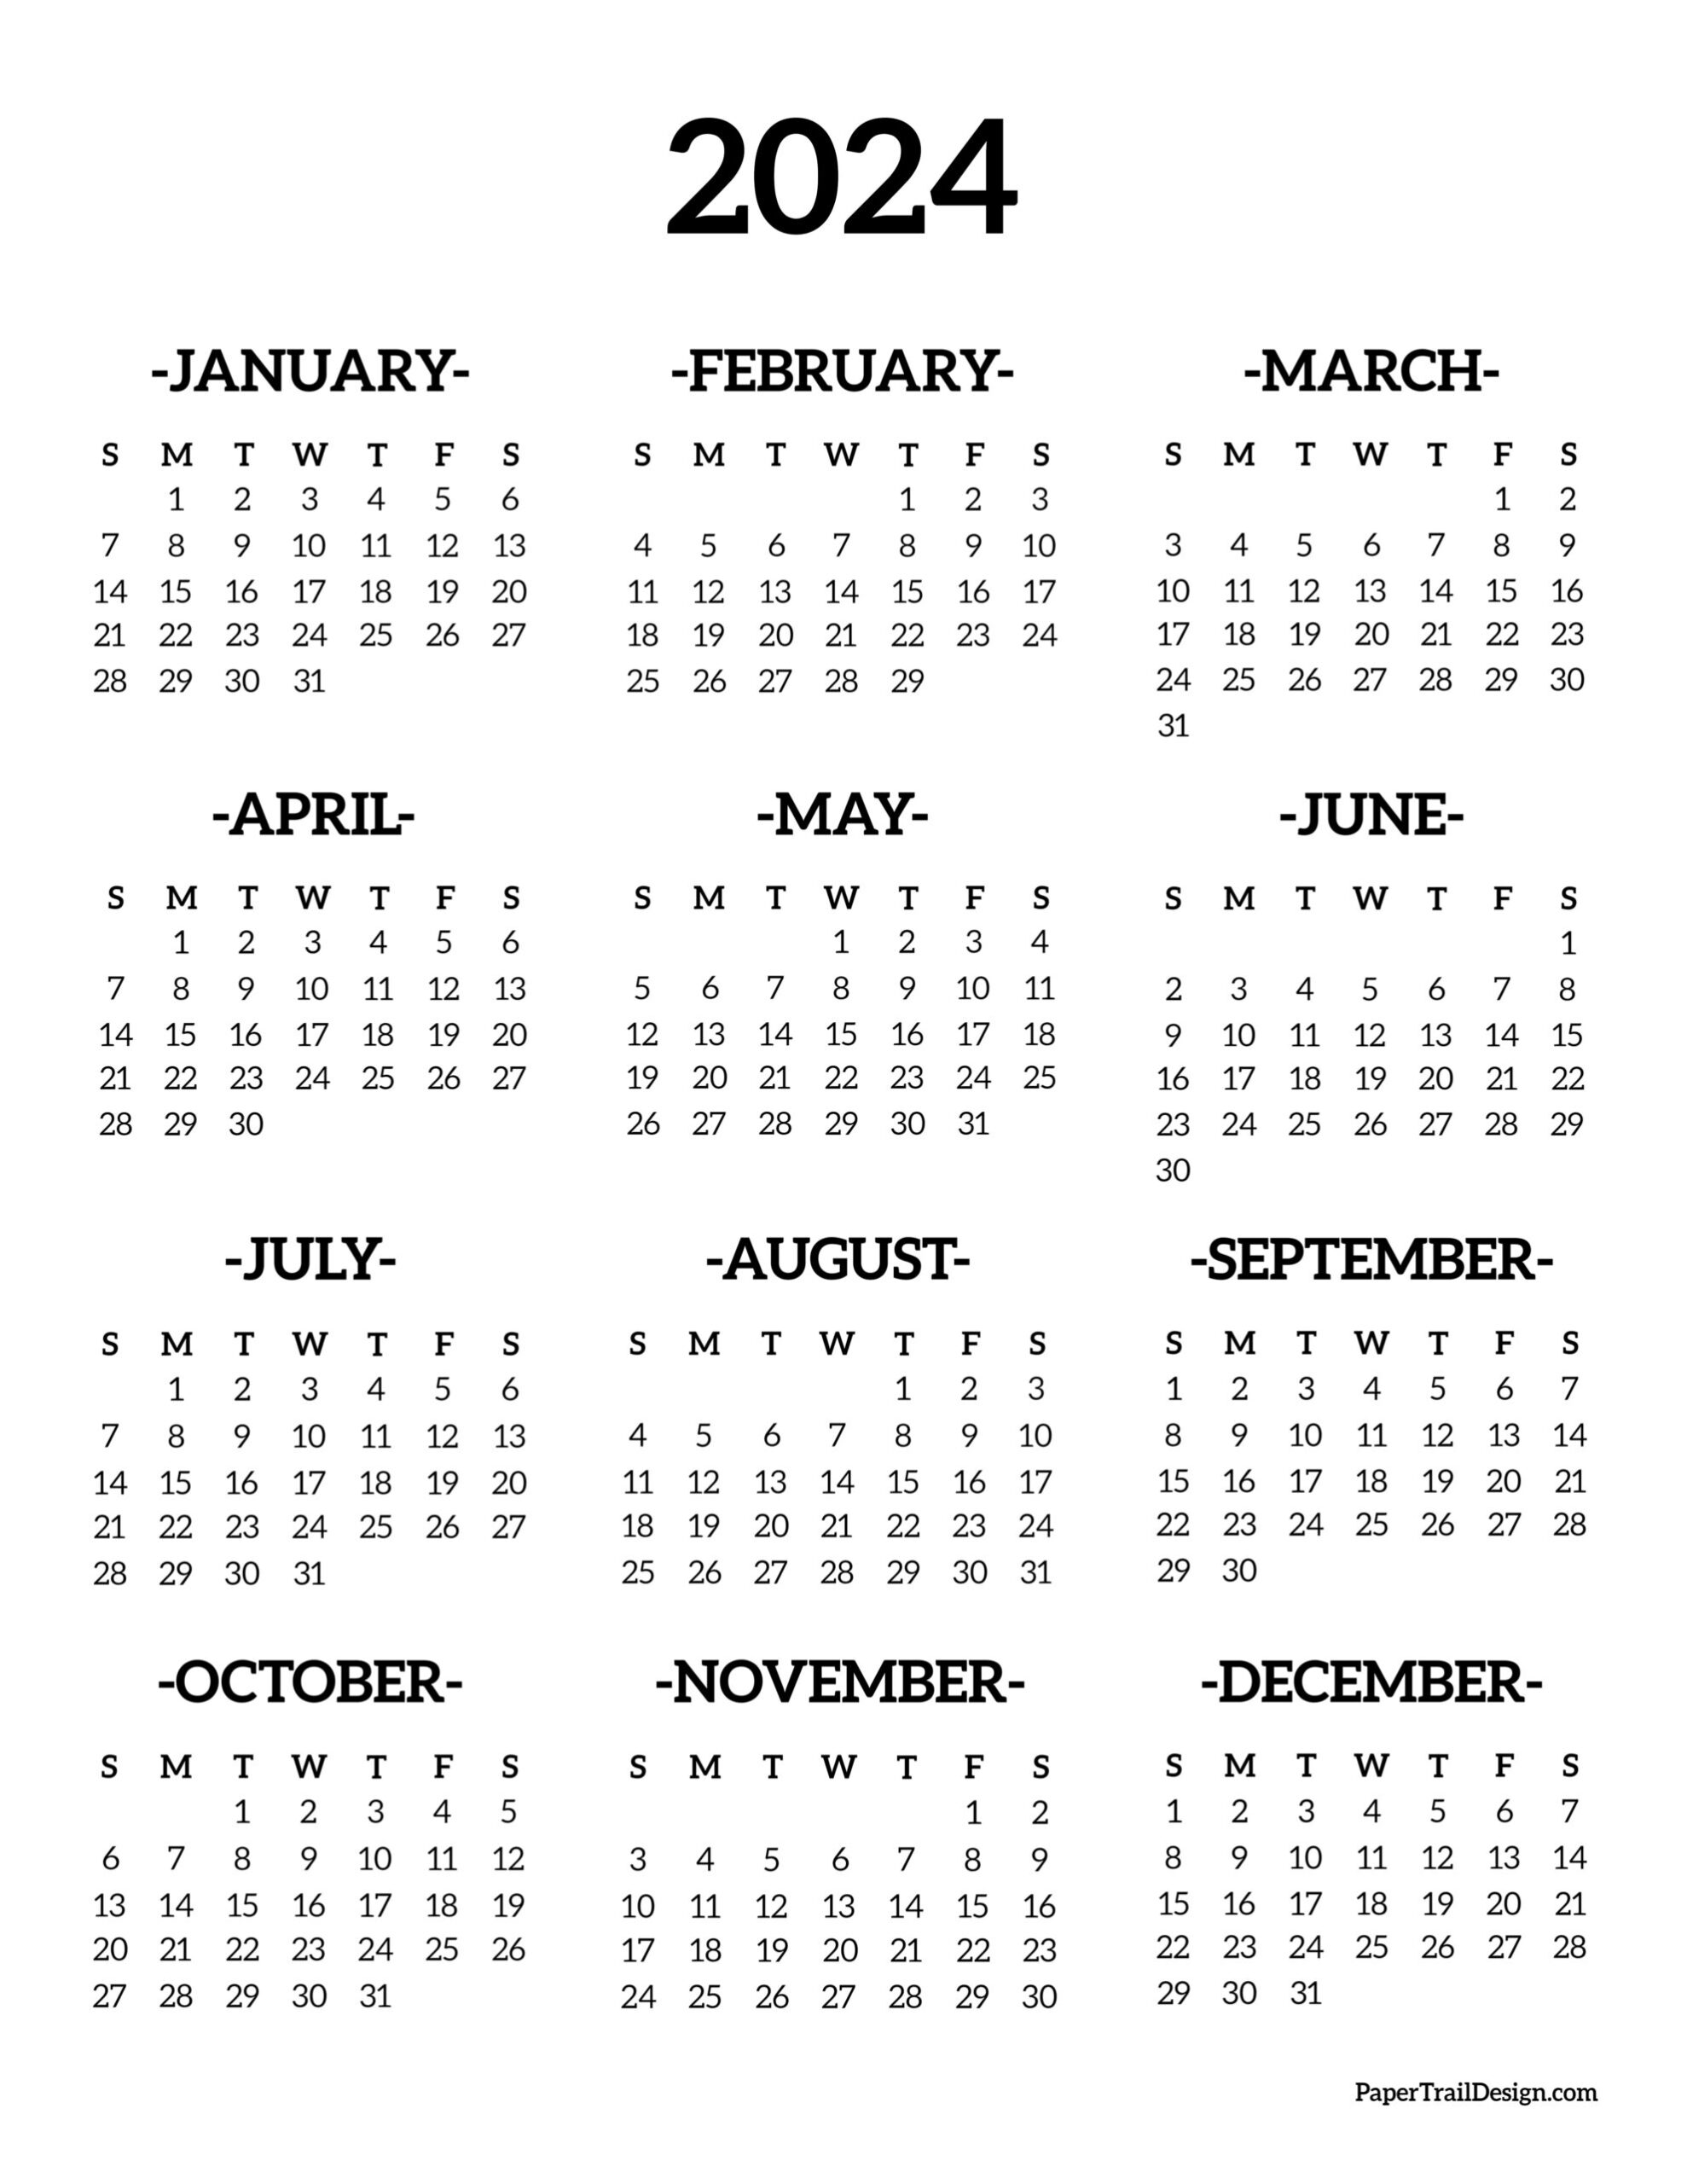 Calendar 2024 Printable One Page - Paper Trail Design for At A Glance Printable Calendar 2024